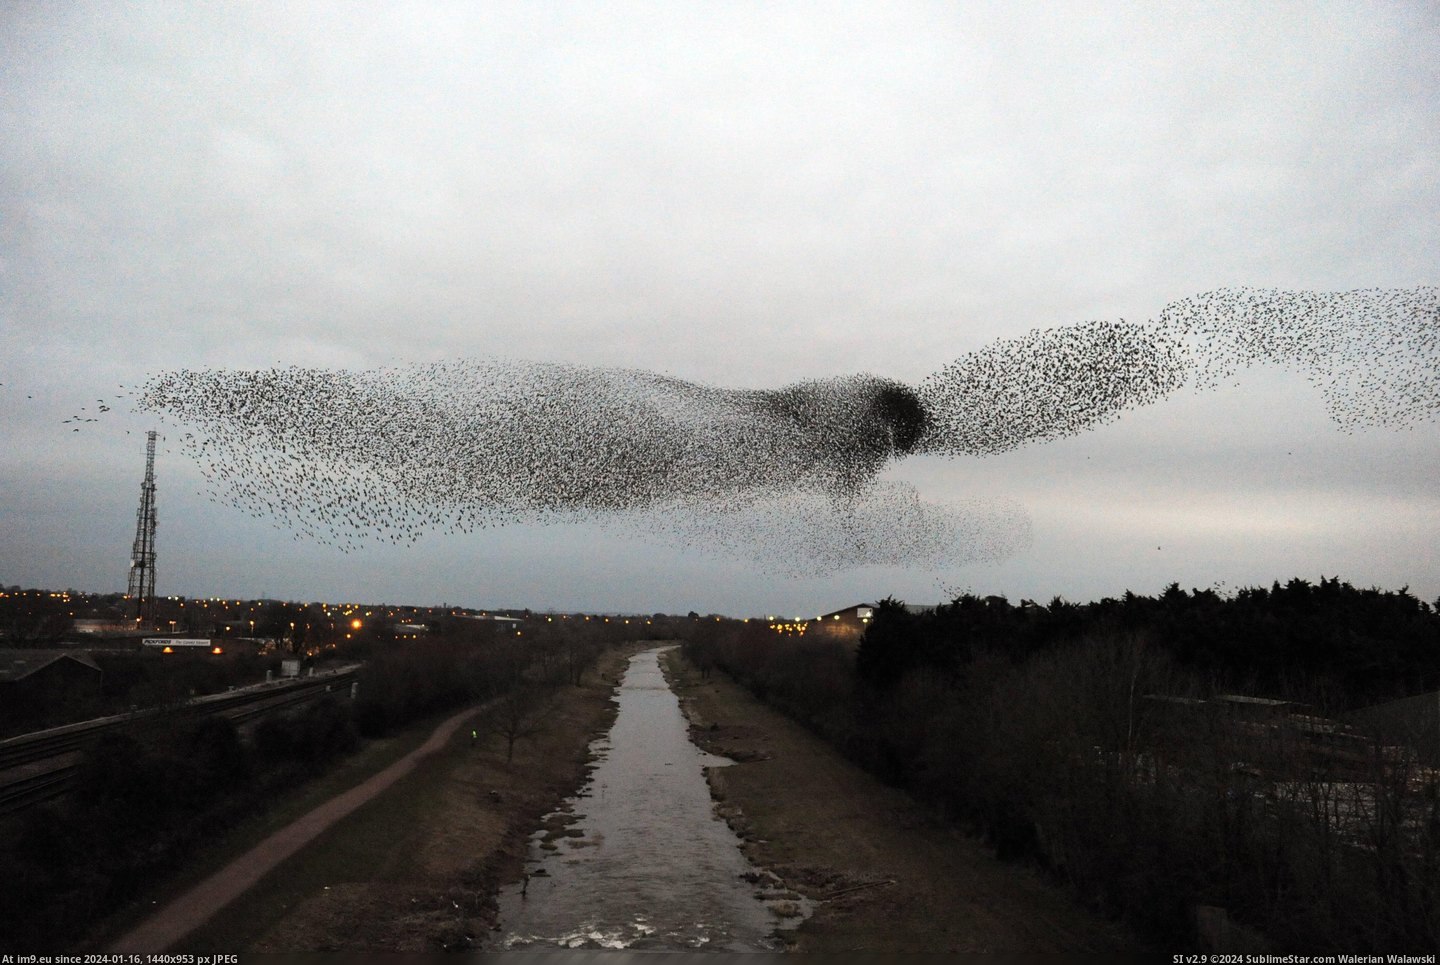 #Huge #England #Shape #Starlings #Taunton #Form #Hawk #Flock [Pics] A huge flock of starlings form the shape of a hawk in Taunton, England Pic. (Obraz z album My r/PICS favs))